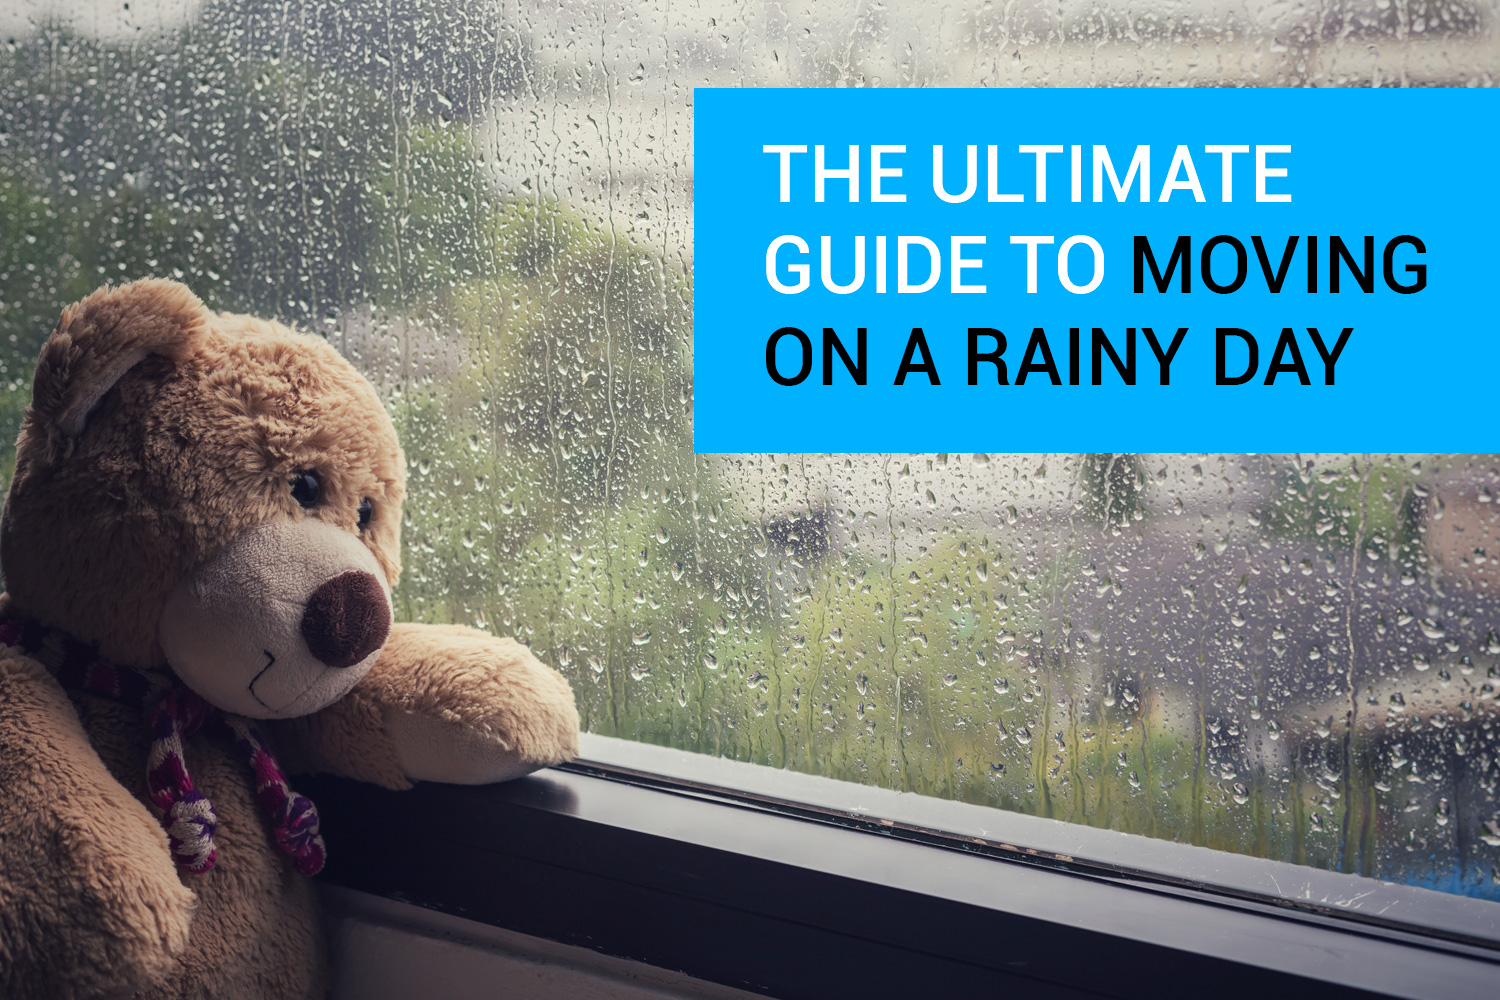 The Ultimate Guide to Moving On A Rainy Day